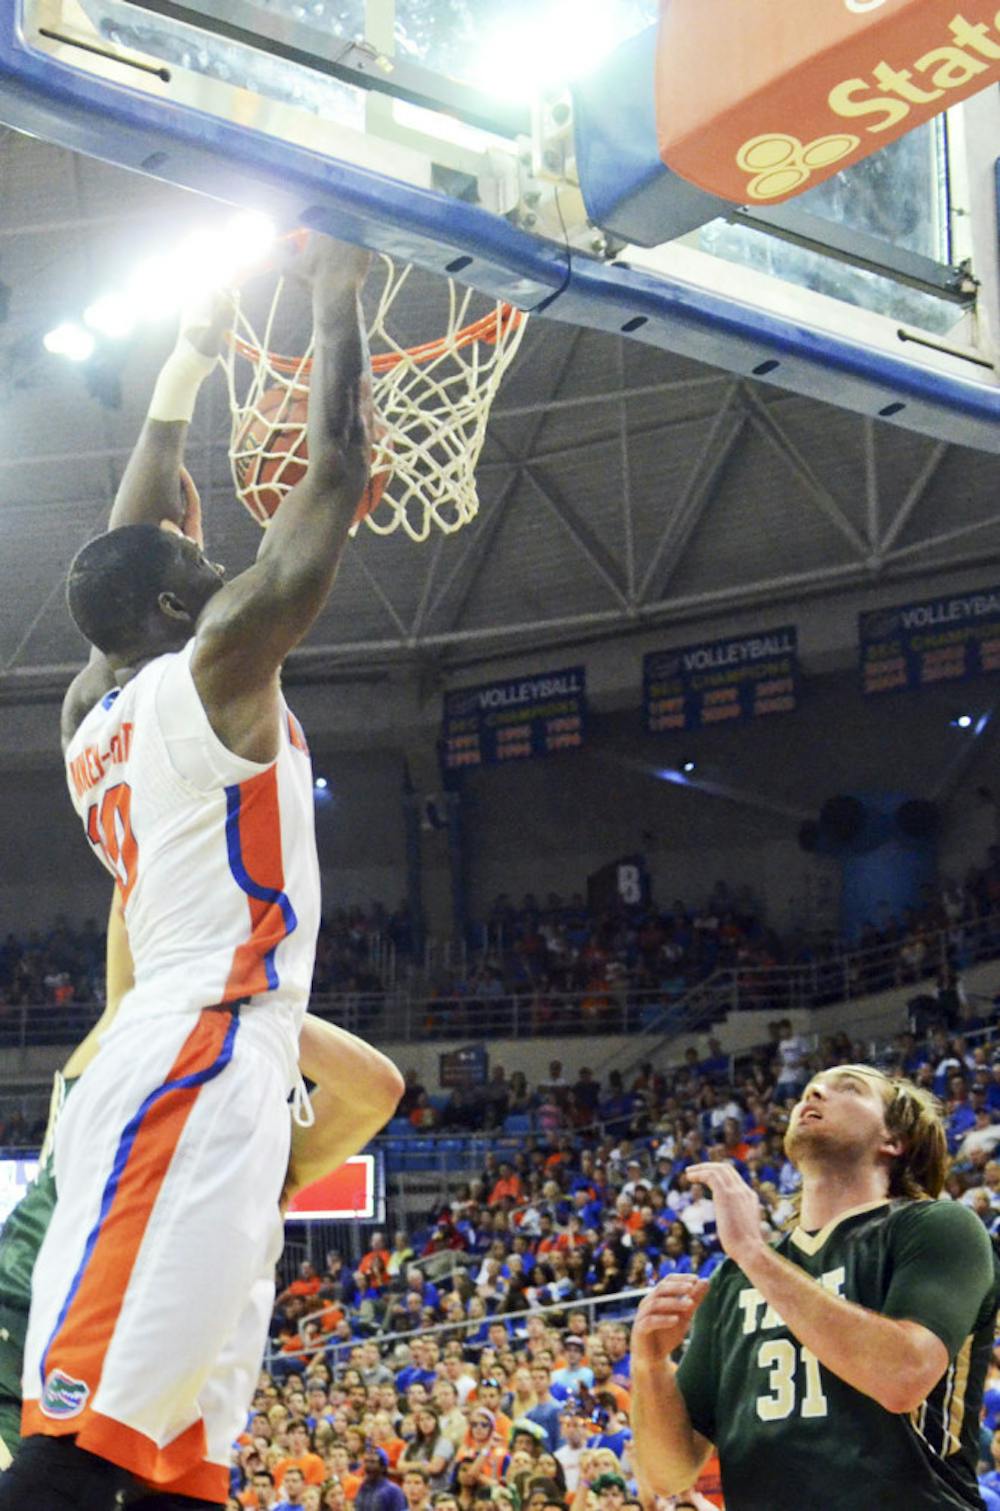 <p>Dorian Finney-Smith dunks during Florida's win against William &amp; Mary on Friday in the O'Connell Center</p>